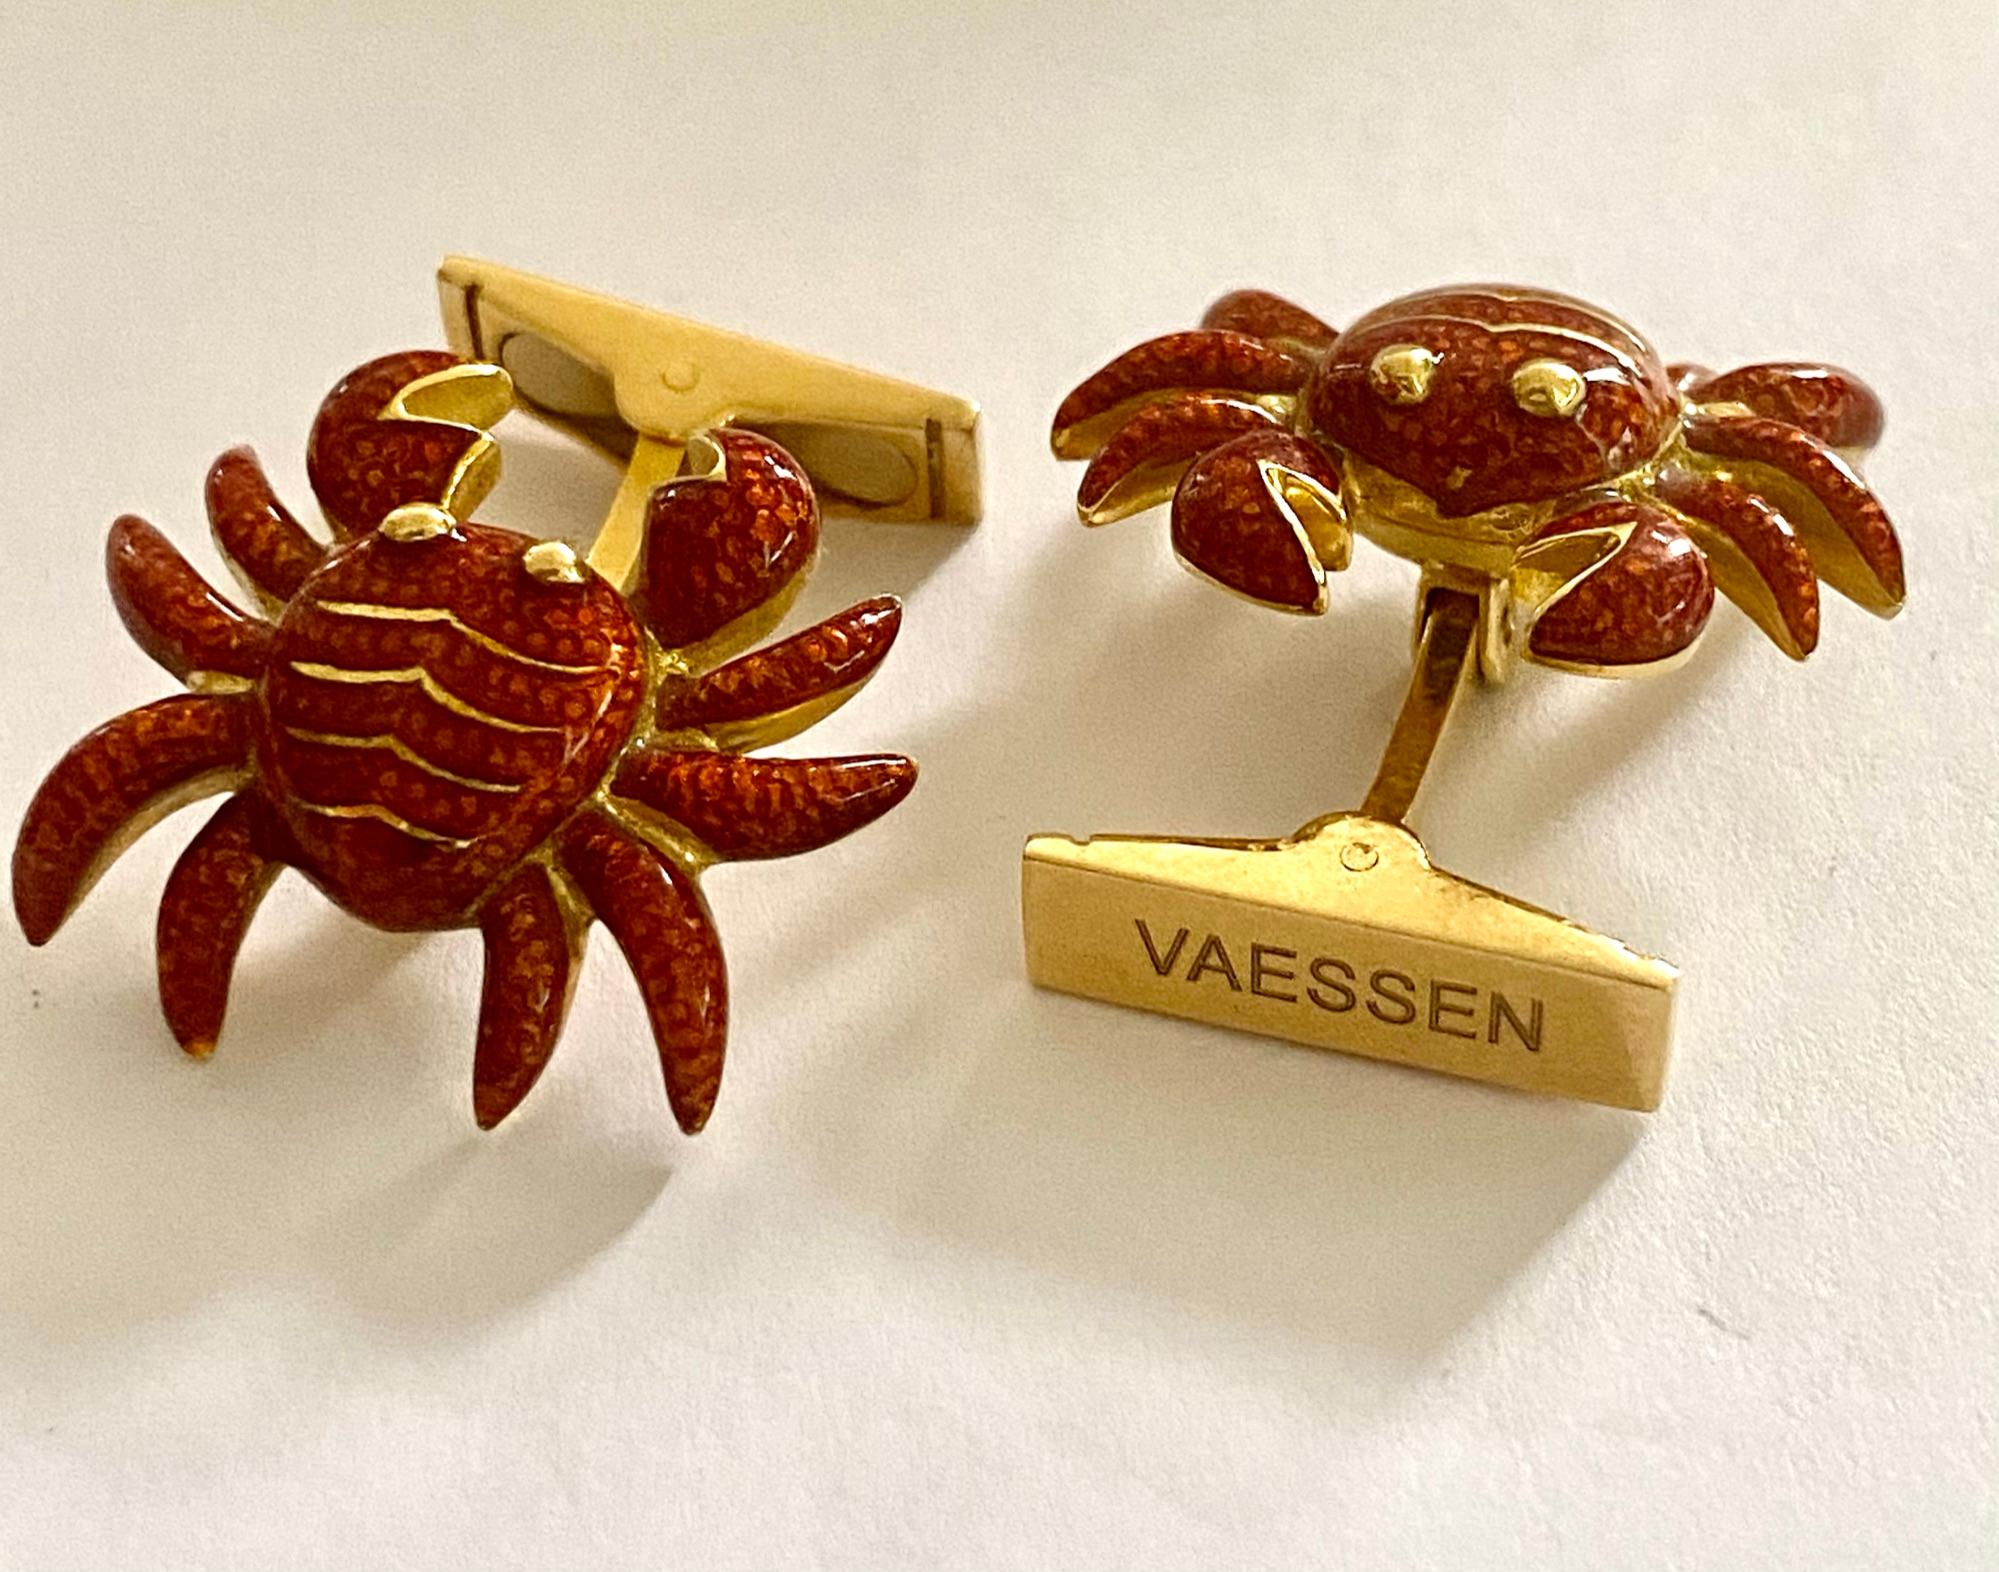 One (10 pairs of 18K yellow gold cufflinks in the shape of a Crab.
Brown Enamel, signed: Vaessen
size: 22.5 x 29.5 x 7 mm = Crab.
size: back plate: 15 x 5 mm
Weight: 18.77 grams
Made in Italy around 2010